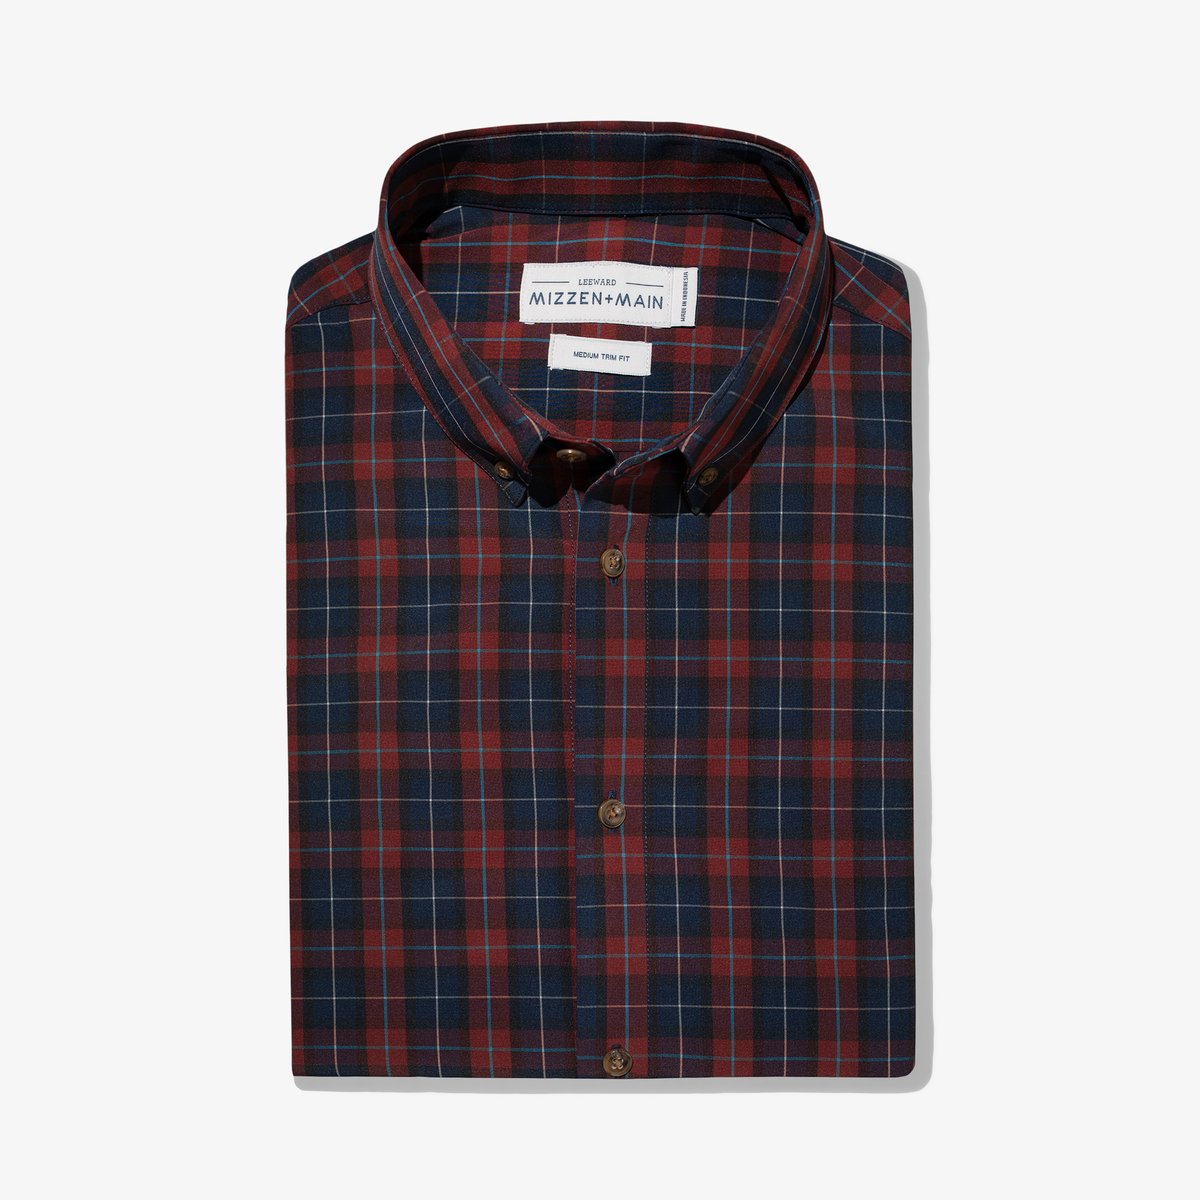 Mizzen+Main Cyber Monday Sale: Score 25% Off $200+ With This Discount ...